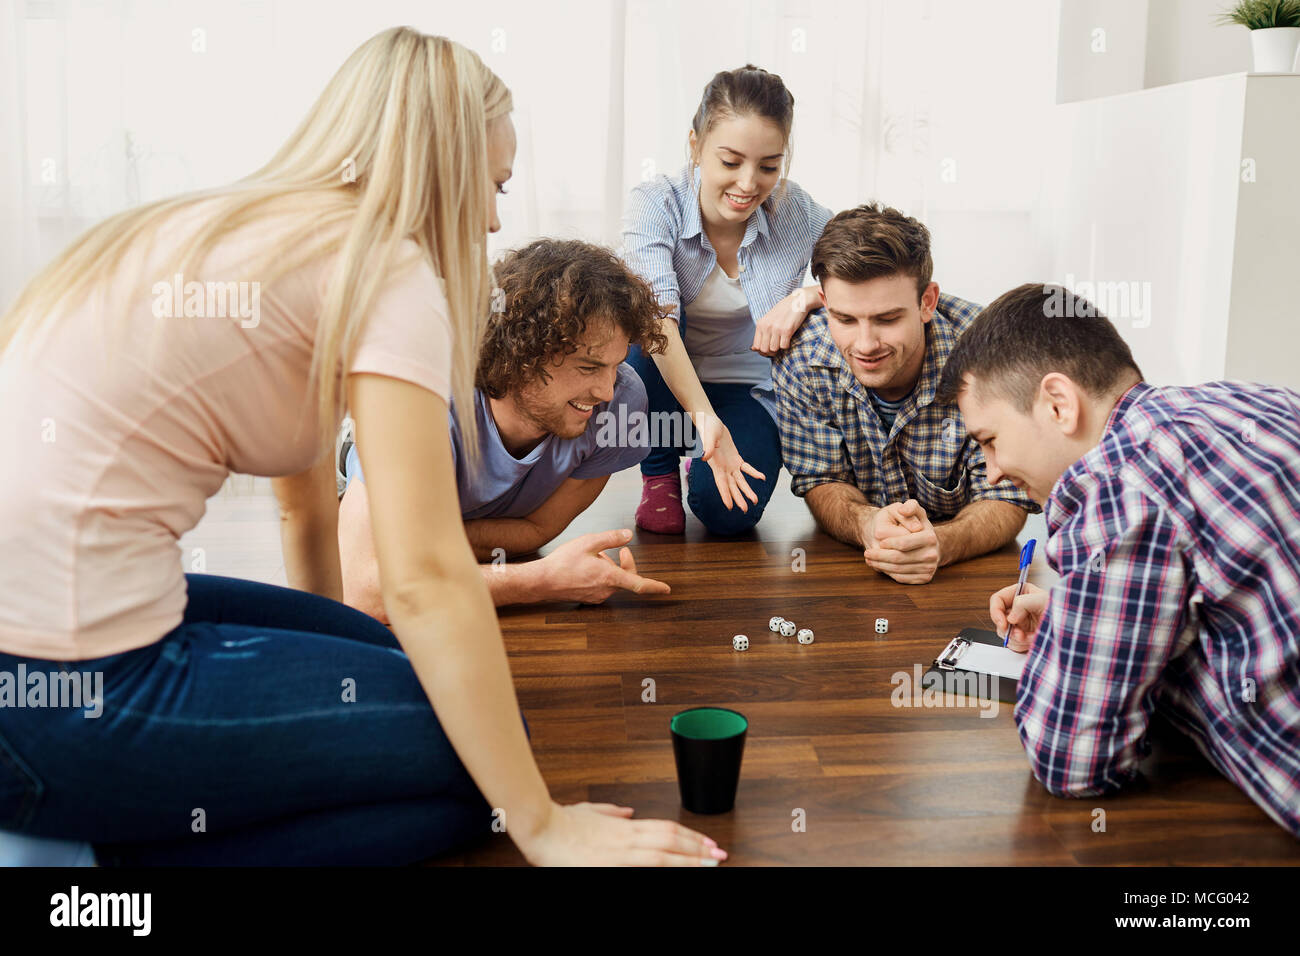 A group of friends play board games on the floor having fun at a party indoors. Stock Photo